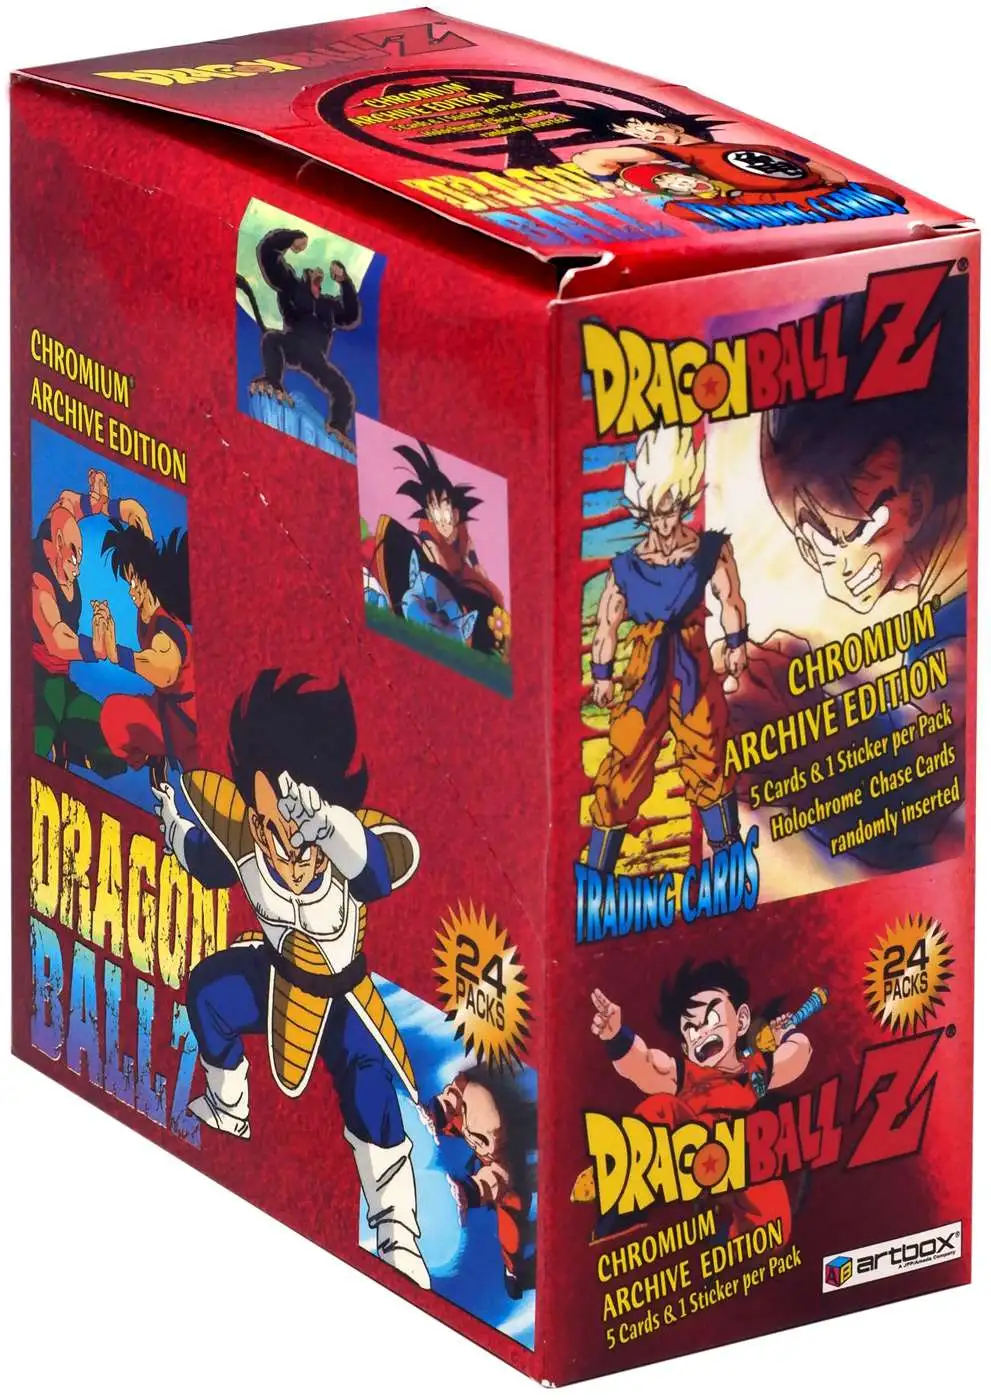 DragonBall Z Chromium Archive Edition 4 Sealed Booster Packs Artbox 